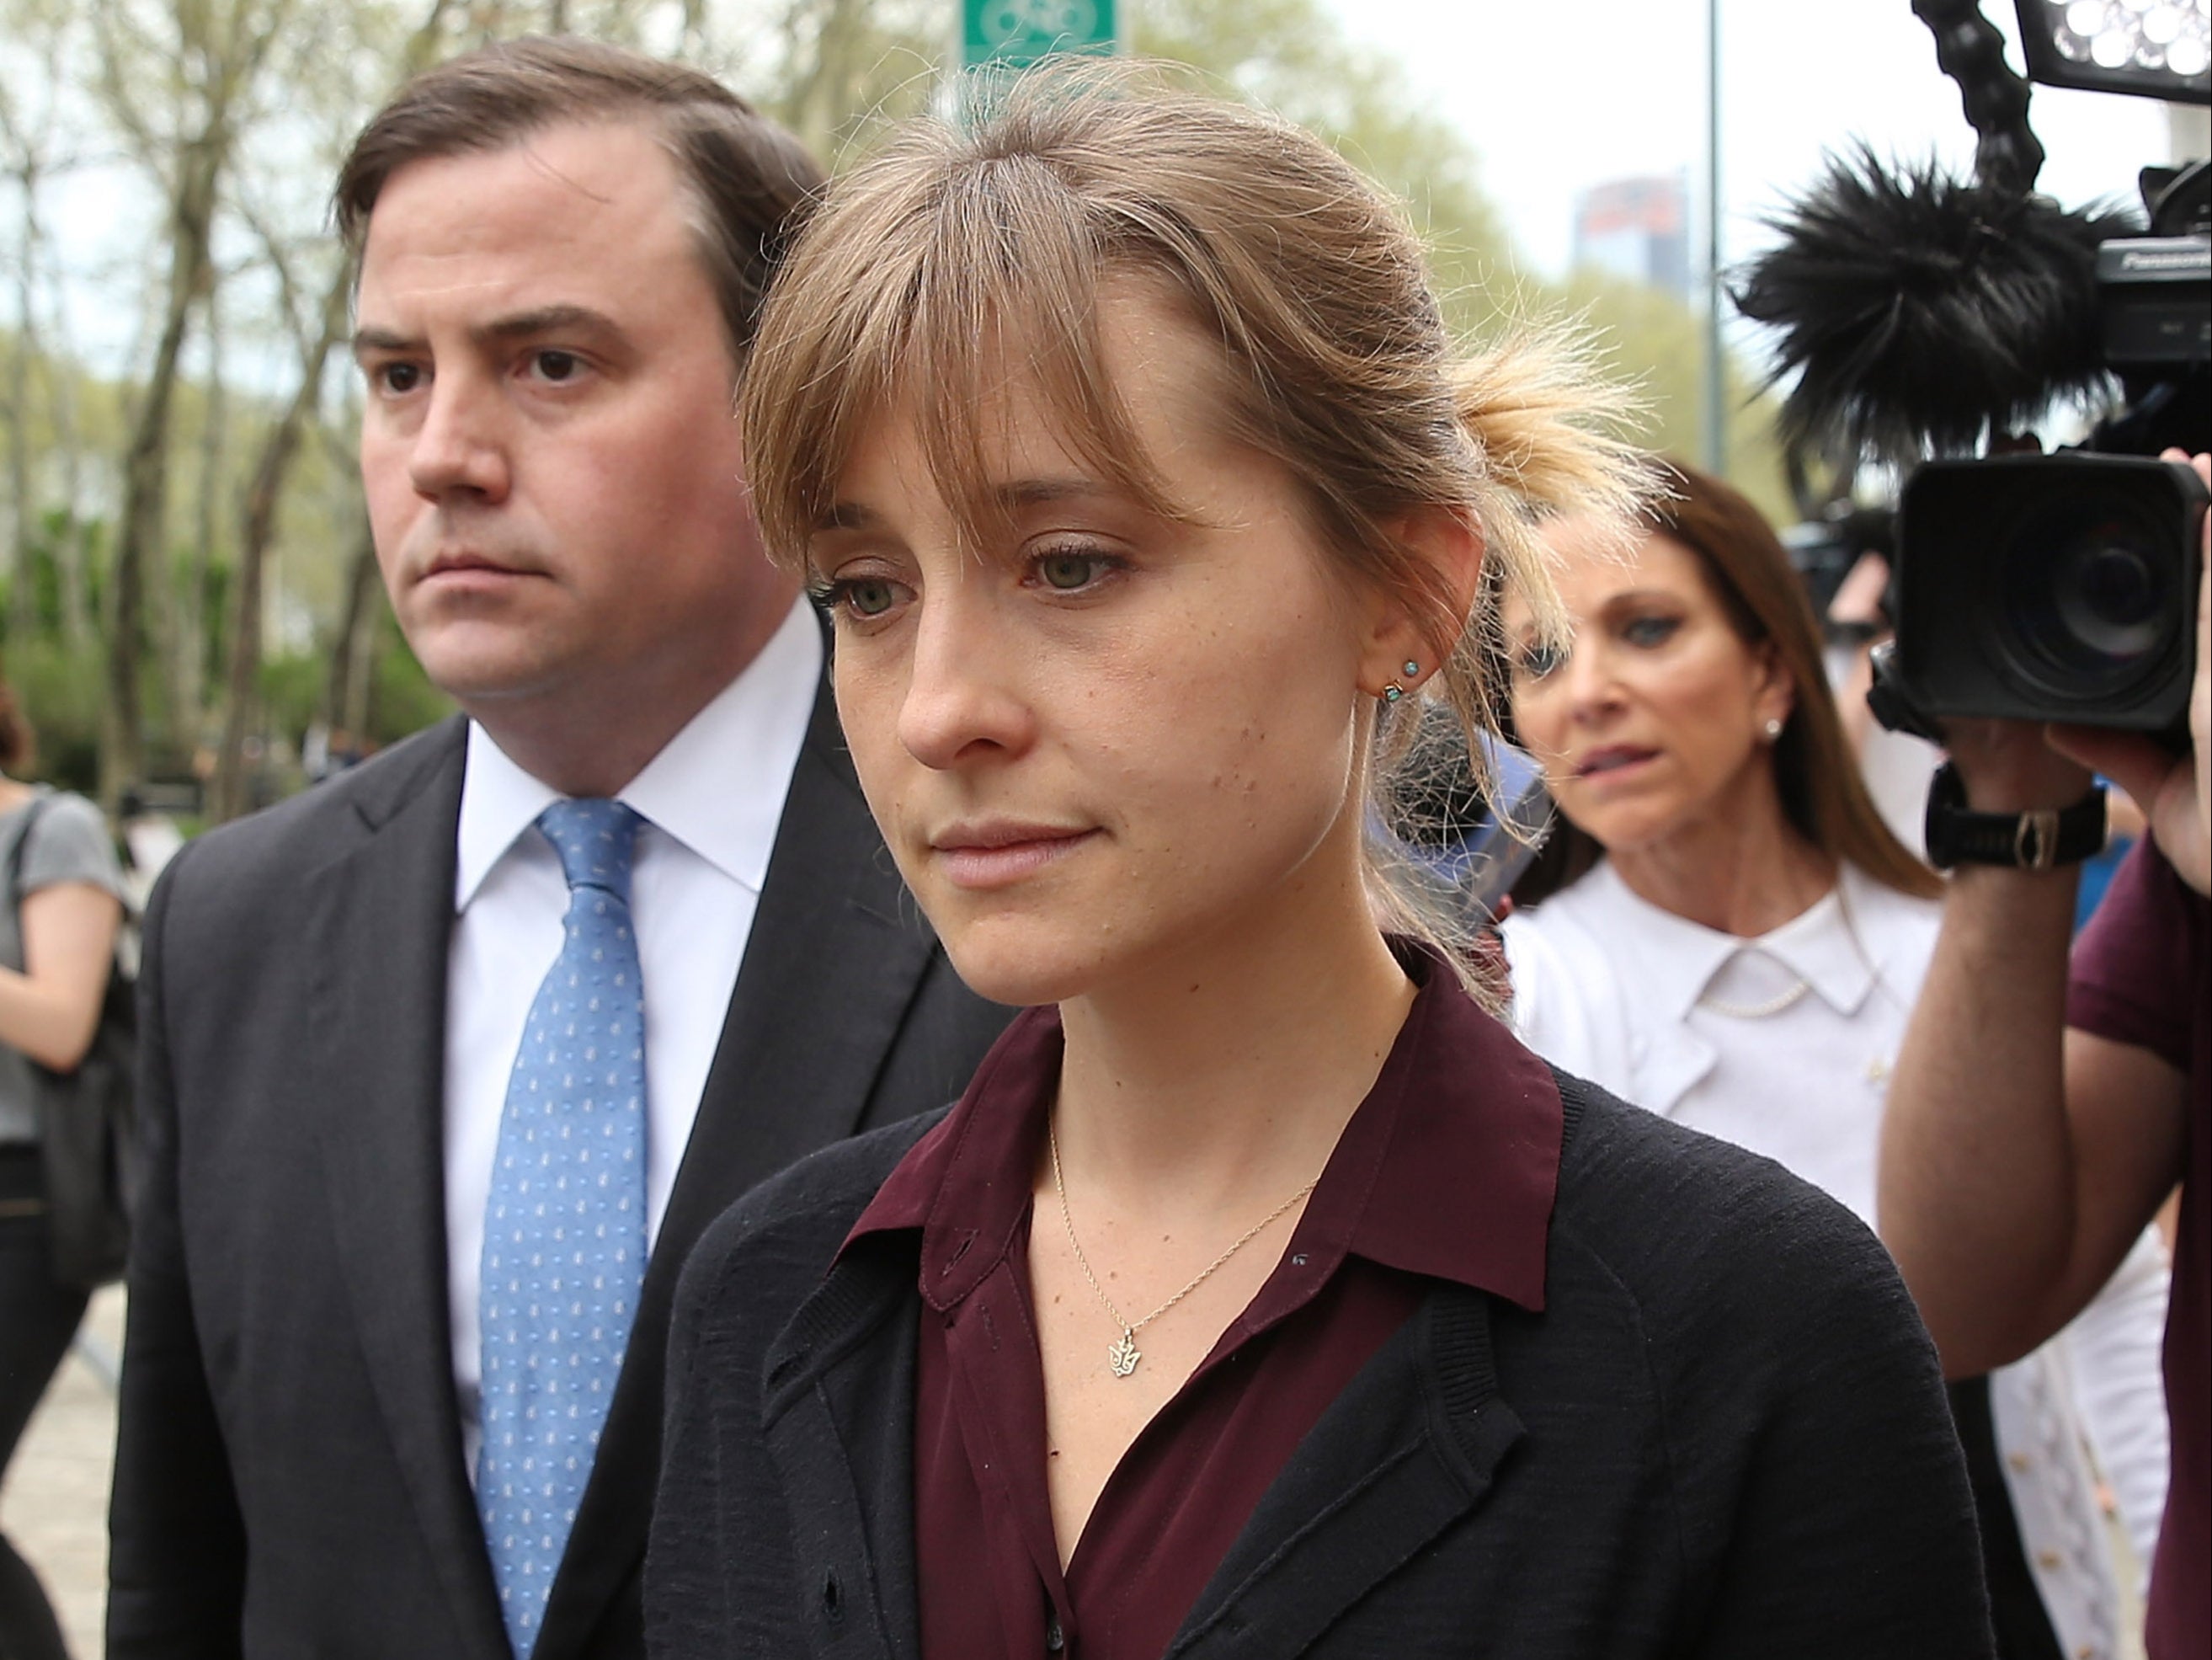 Bail And Girl Sex Videos - Allison Mack: How Smallville star came to be embroiled in criminal sex cult  NXIVM | The Independent